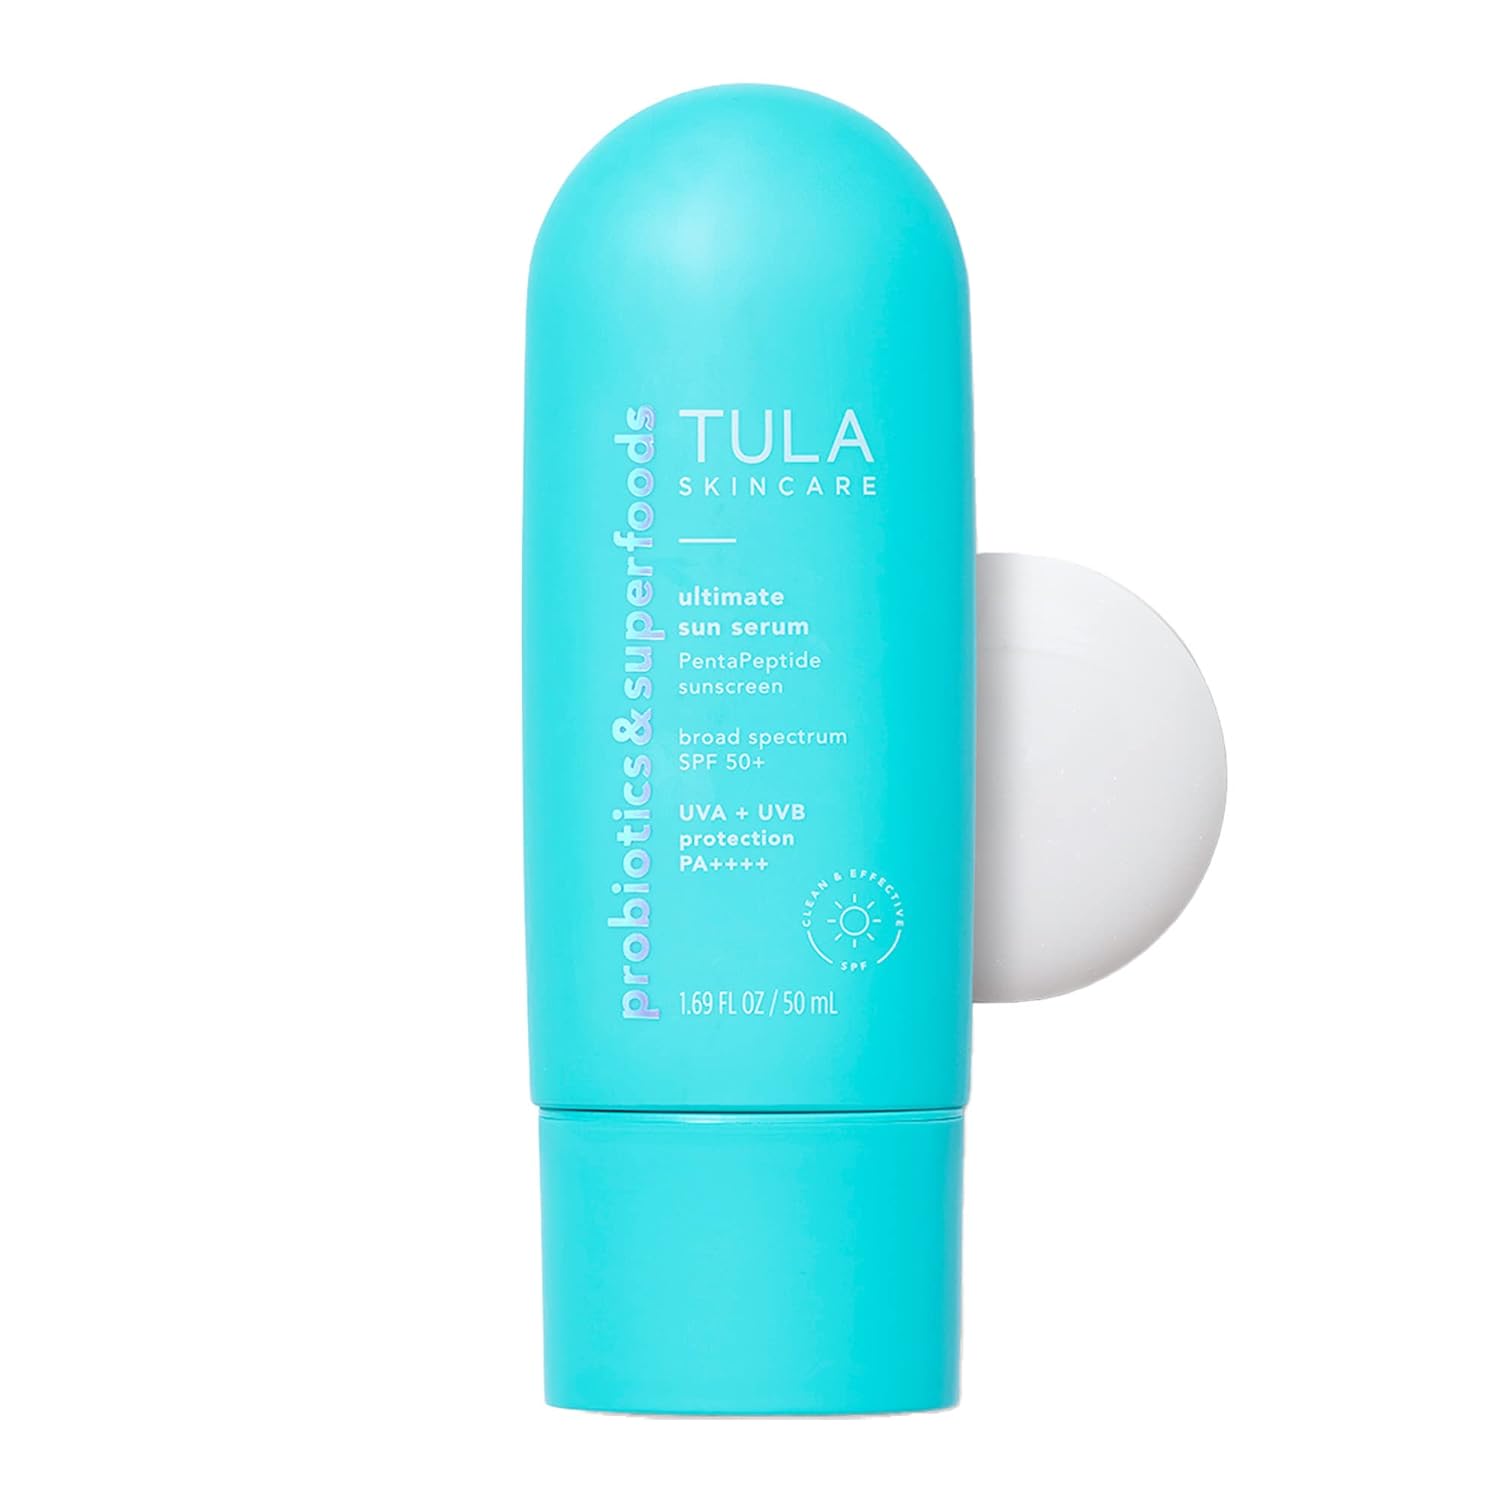 TULA Skin Care Ultimate Sun Serum | PentaPeptide Sunscreen, Broad Spectrum SPF 50, UVA + UVB Protection, Silky, Weightless Formula Glides On & Absorbs Instantly | 1.69 .